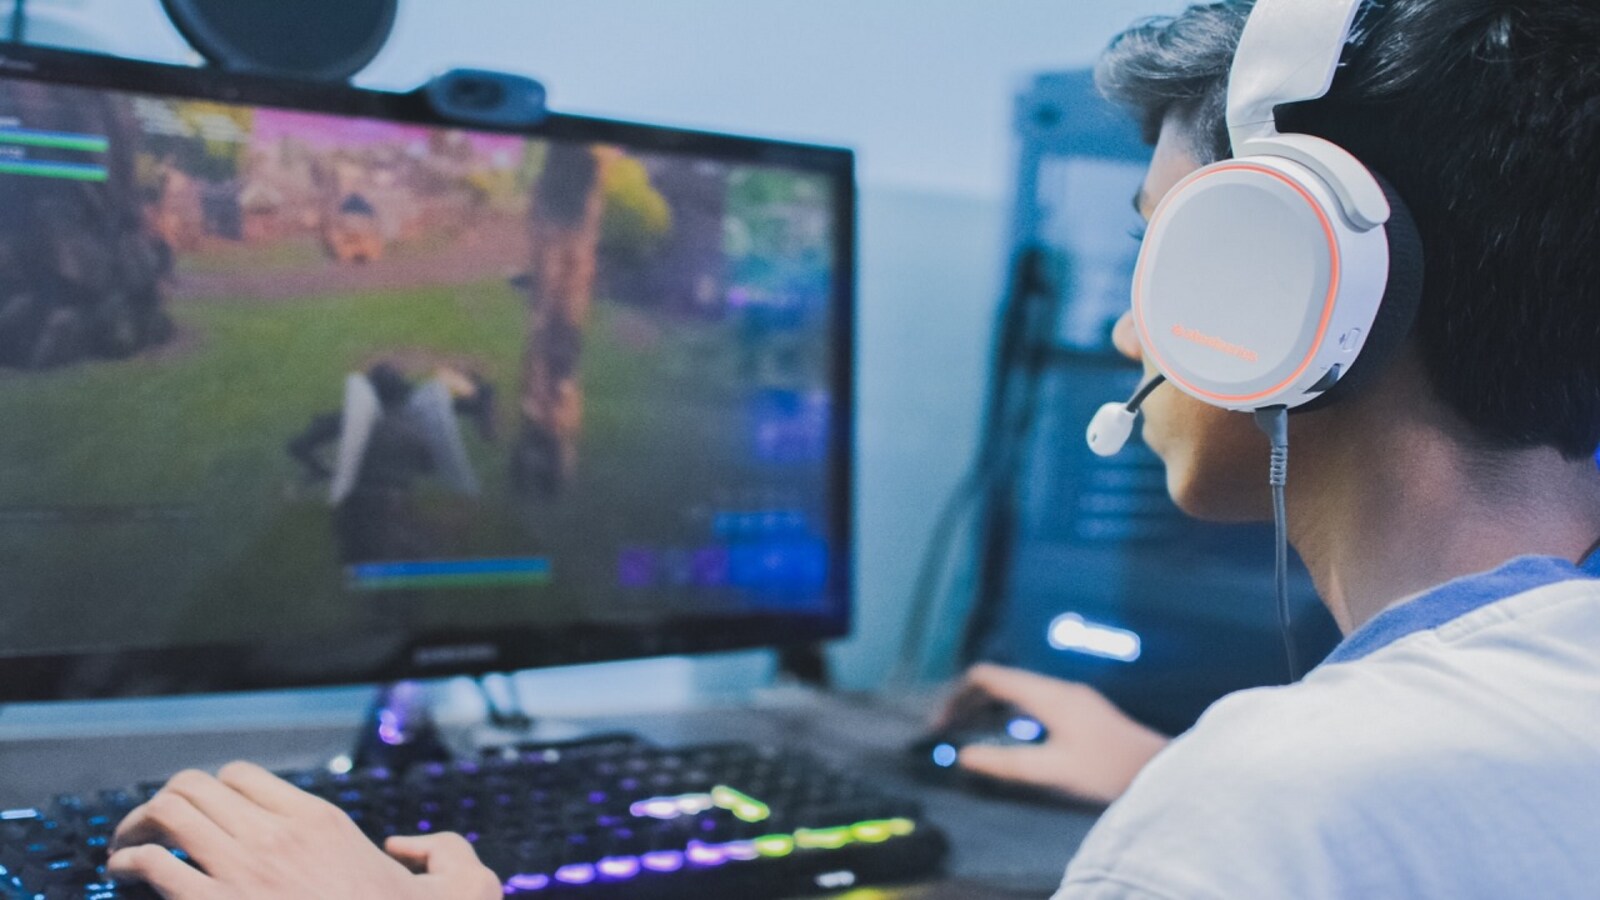 RIP - Real money gaming” says online gaming industry over 28% GST